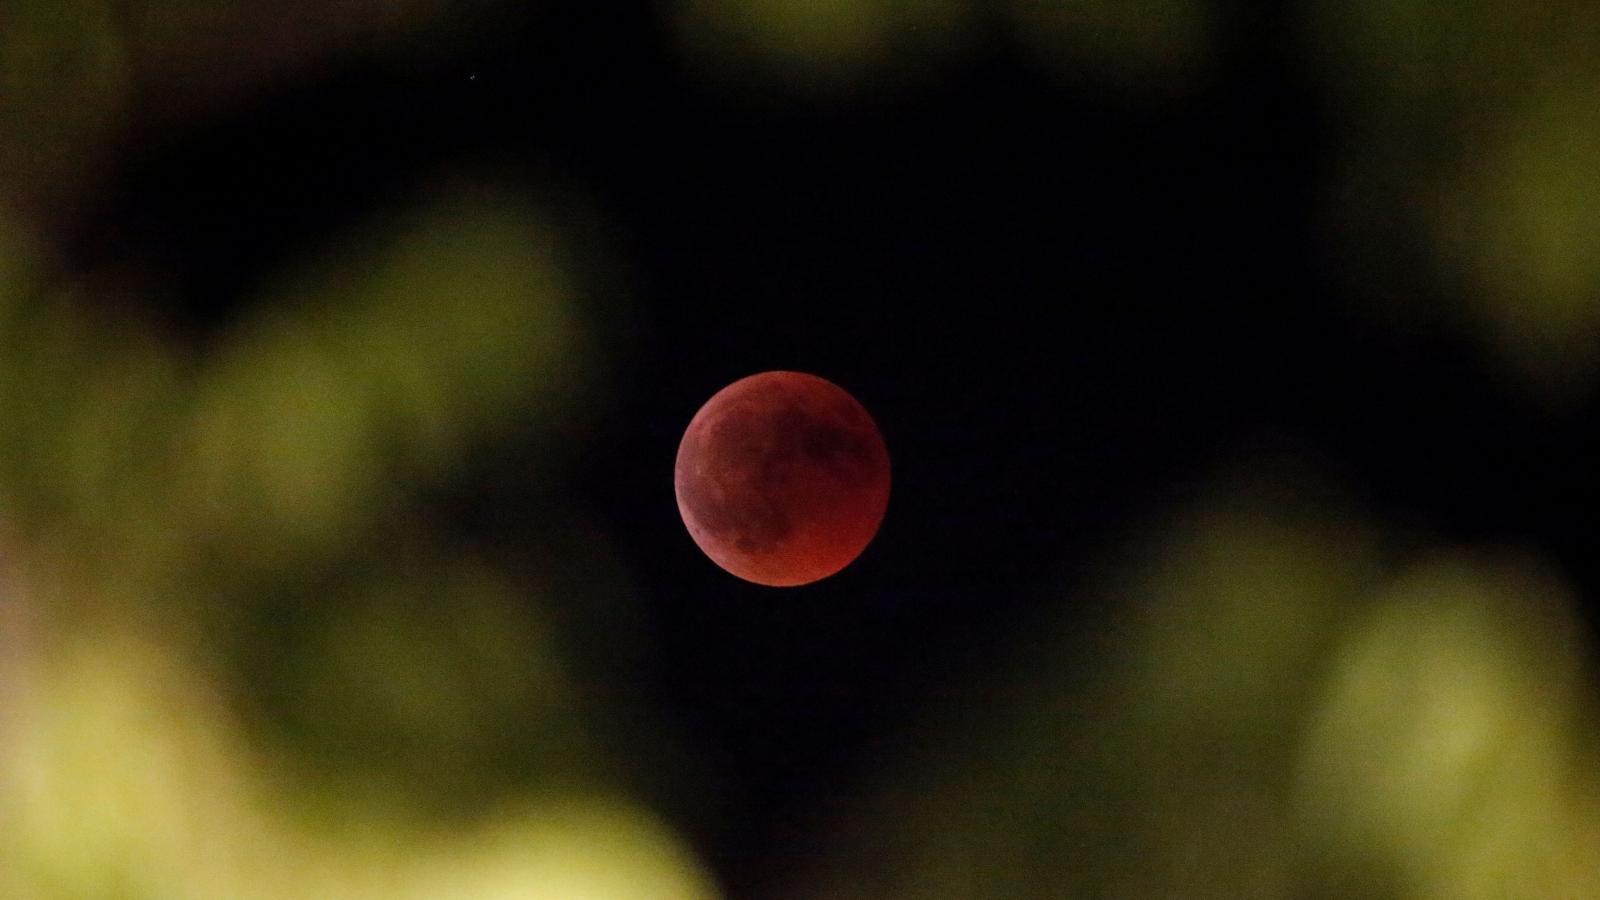 Lunar eclipse January 21: How to watch